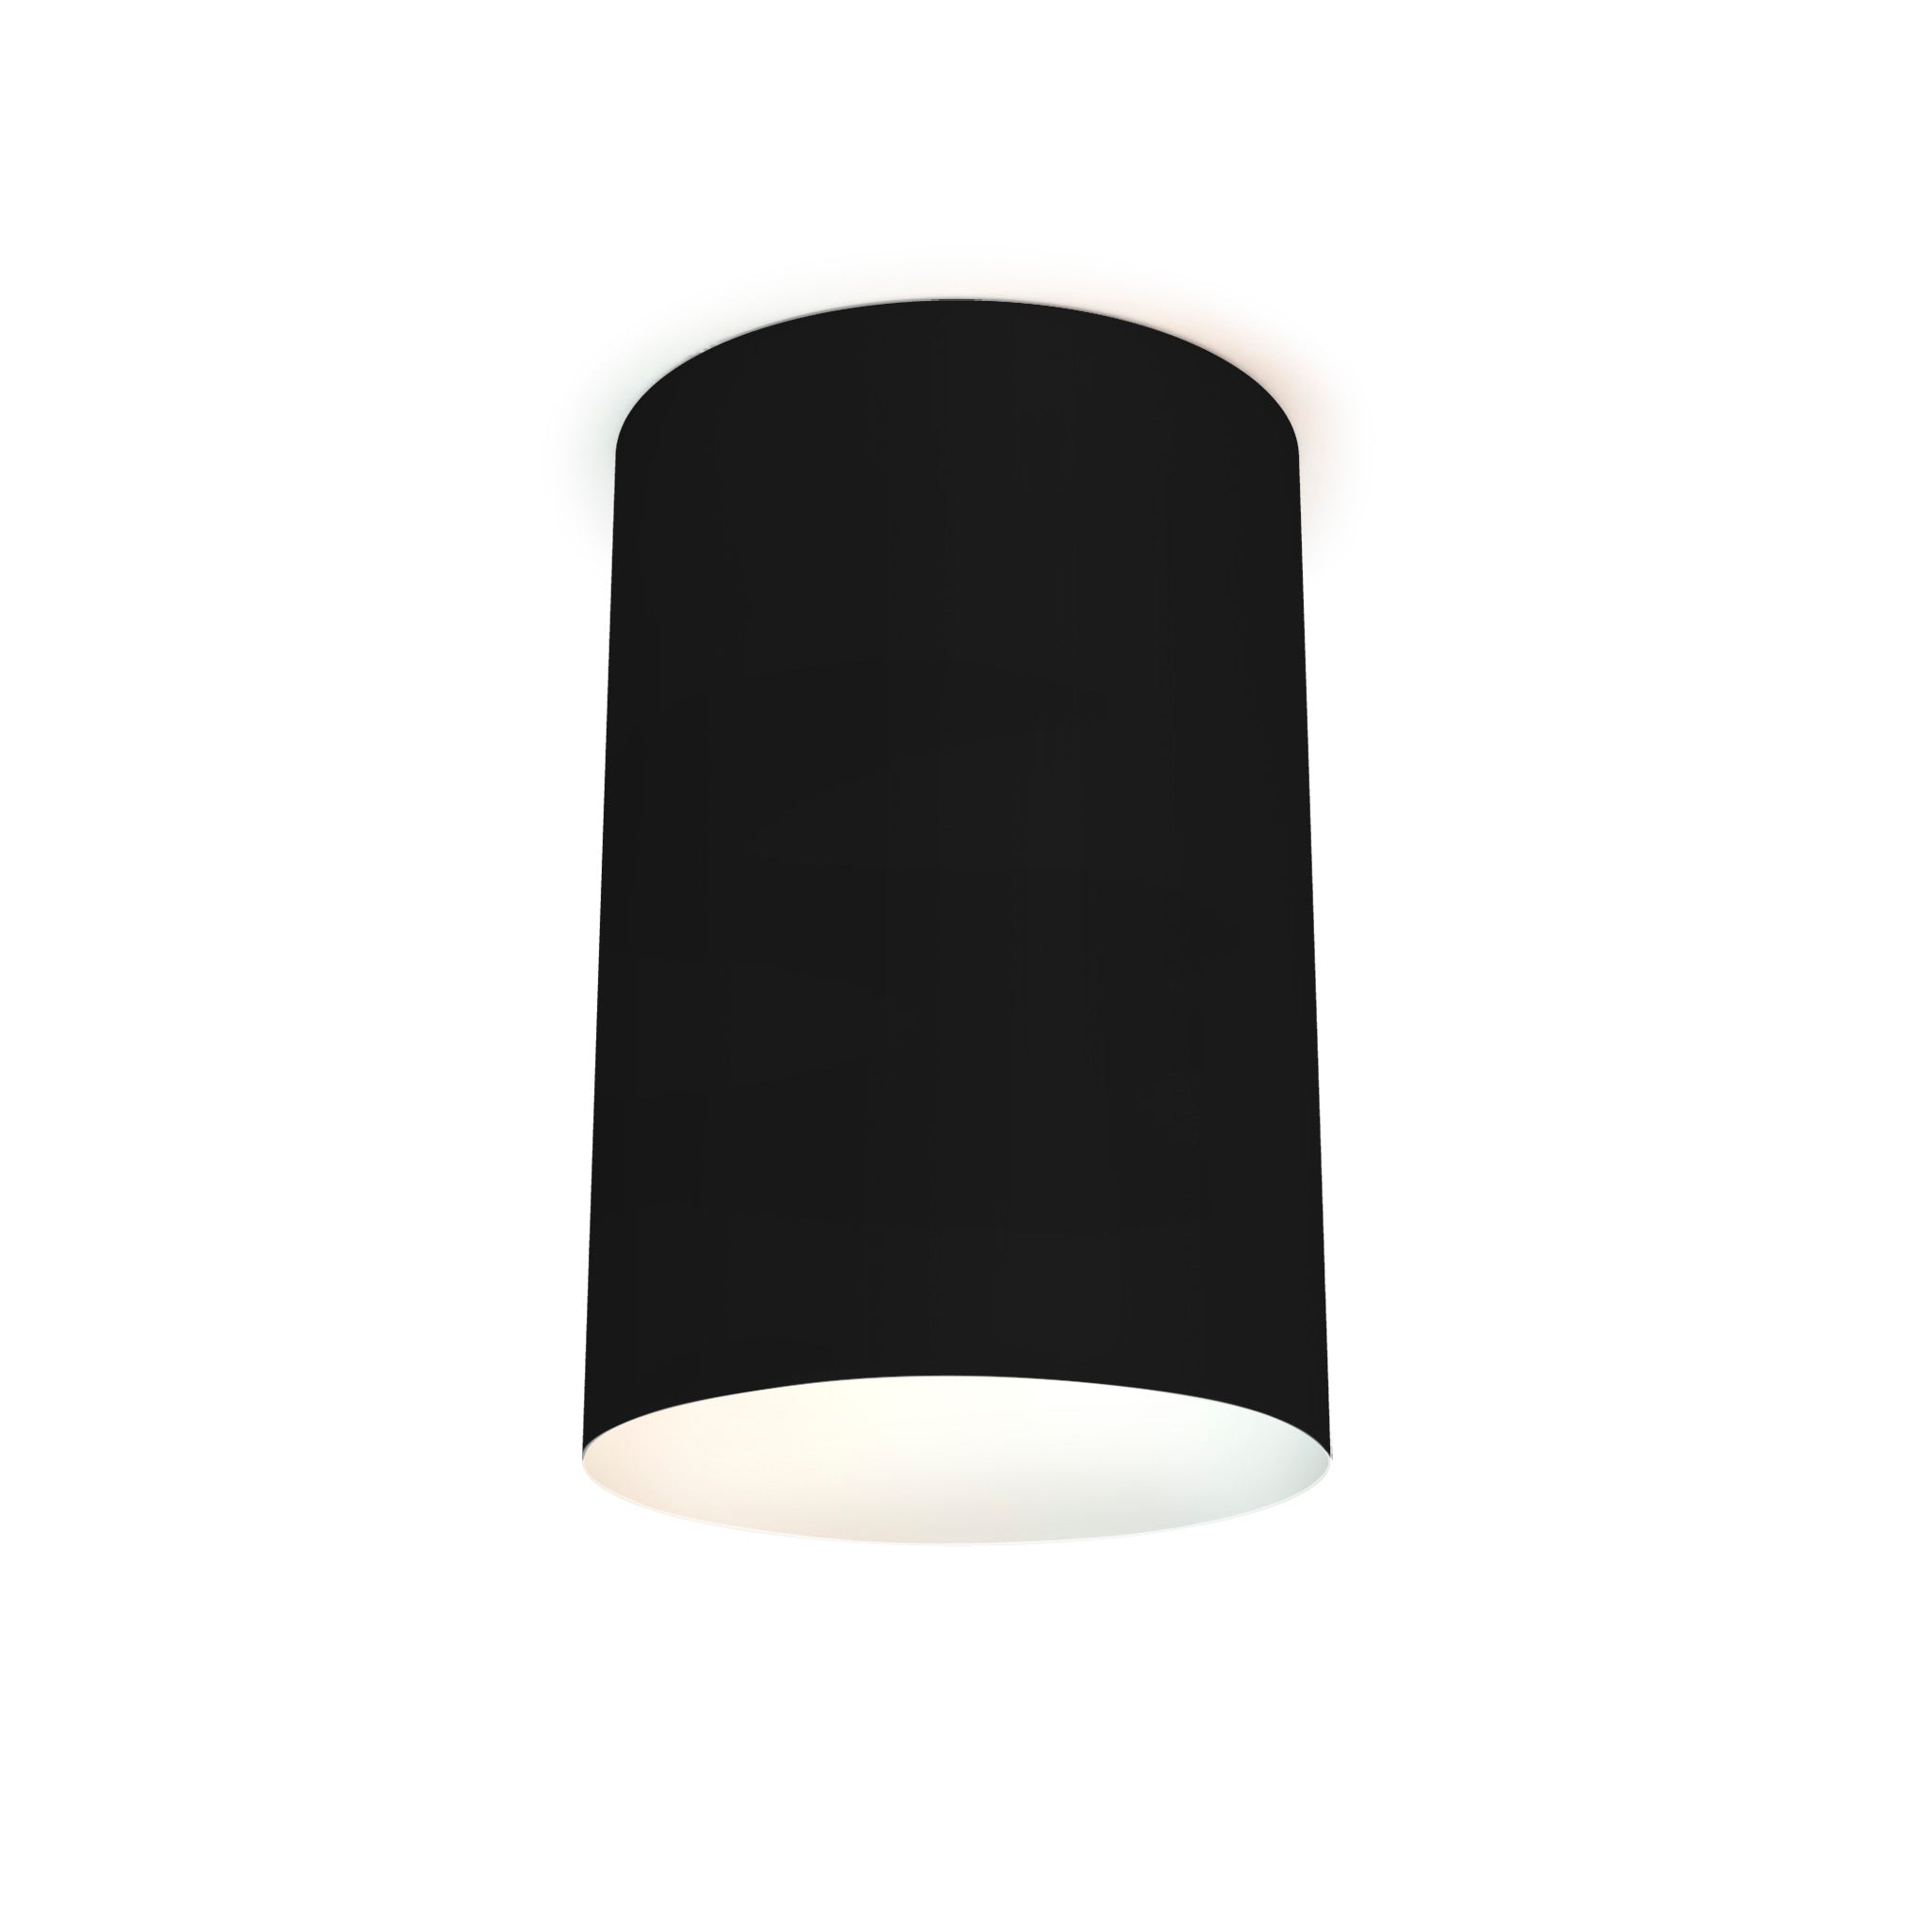 The Lily Flush Mount from Seascape Fixtures in linen, black color.